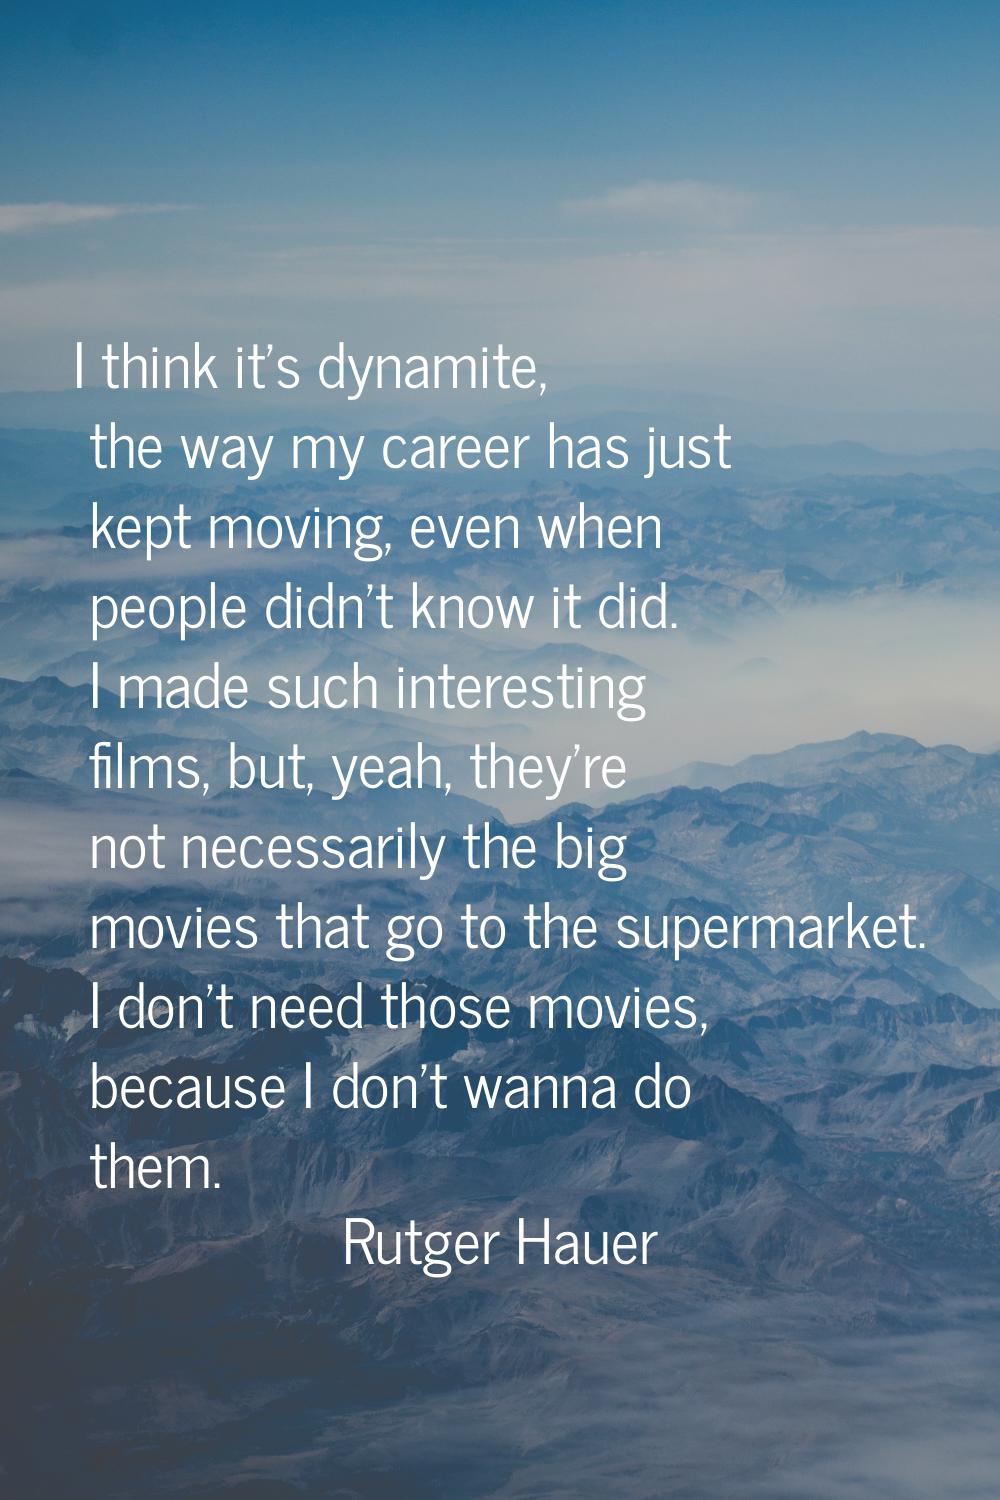 I think it's dynamite, the way my career has just kept moving, even when people didn't know it did.